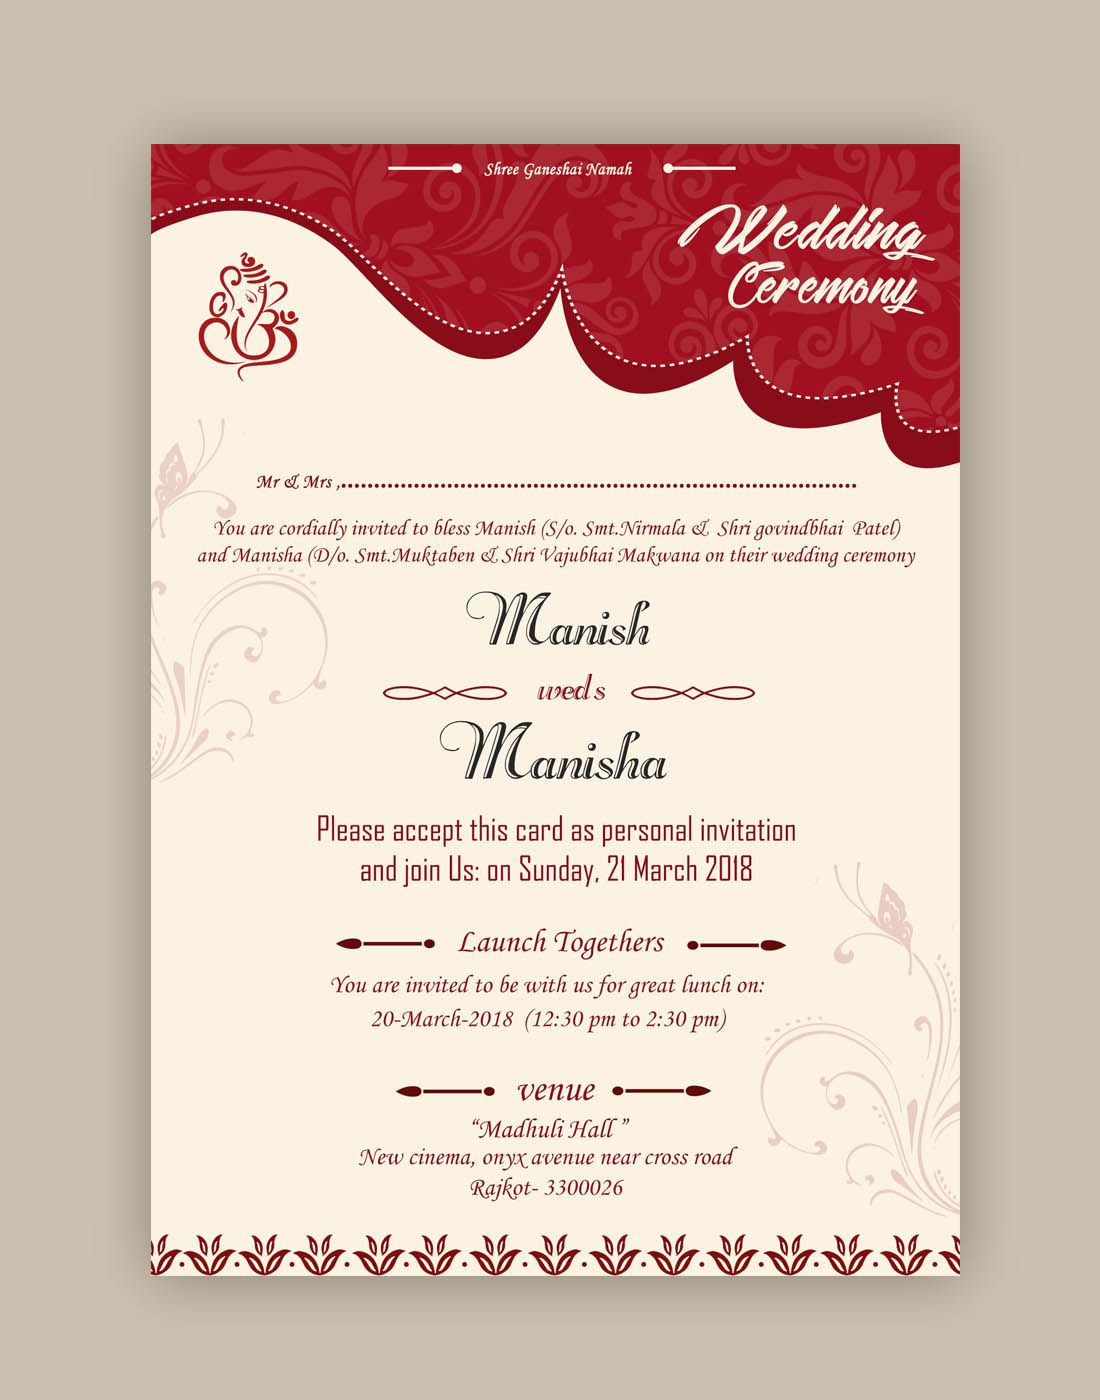 Free Wedding Card Psd Templates In 2019 | Free Wedding Cards Regarding Indian Wedding Cards Design Templates